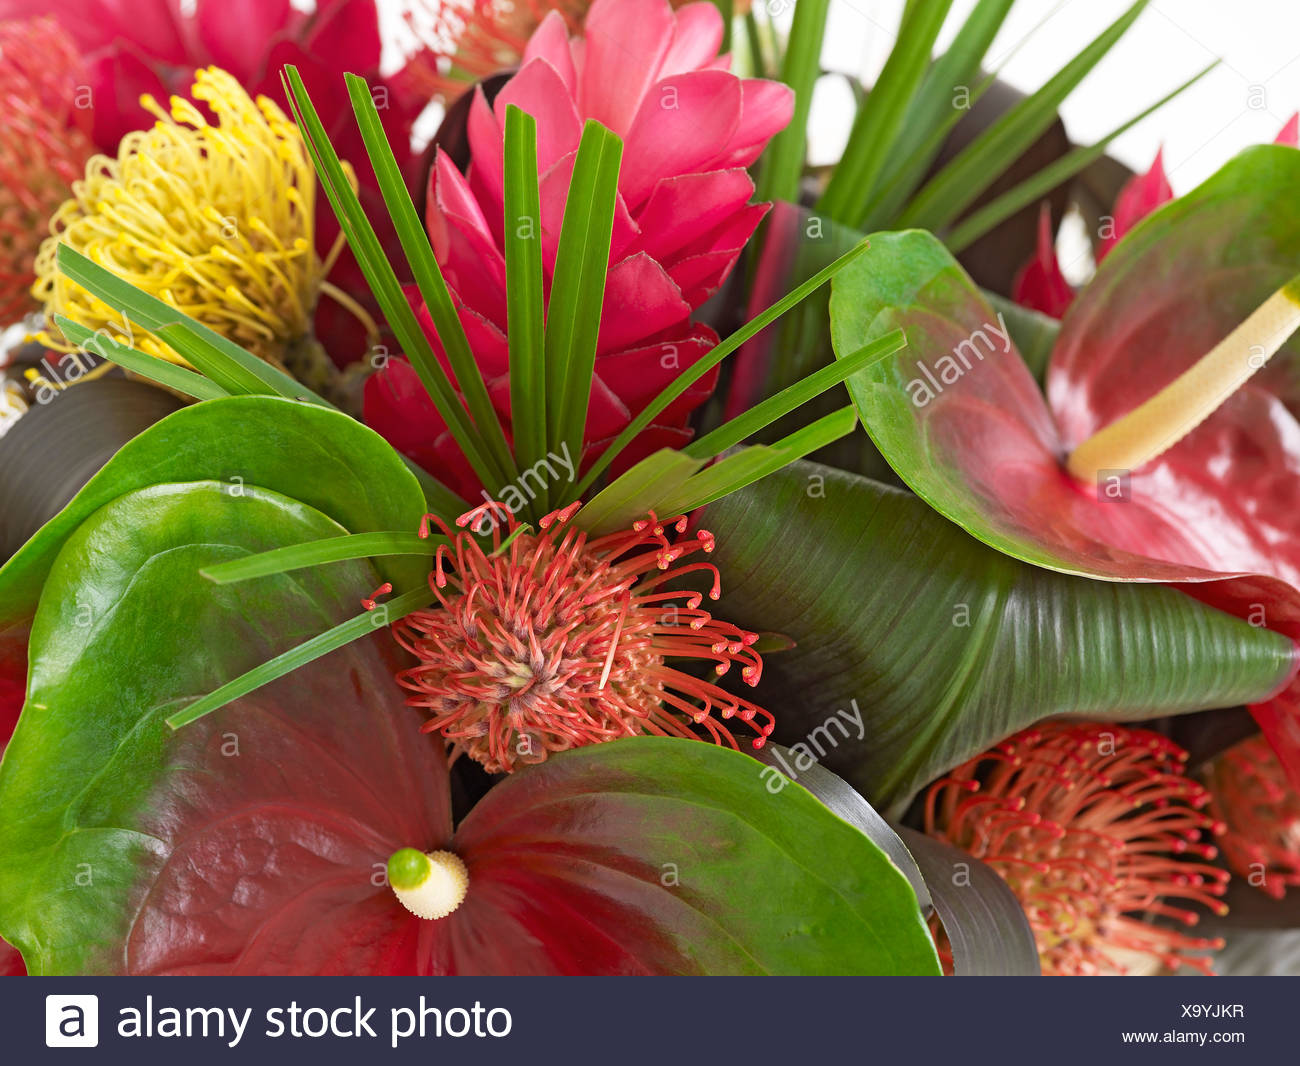 Red Flower Bouquet Including Anthurium Flamingo Lily Heliconia And Red Ginger Lily Close Up Stock Photo Alamy